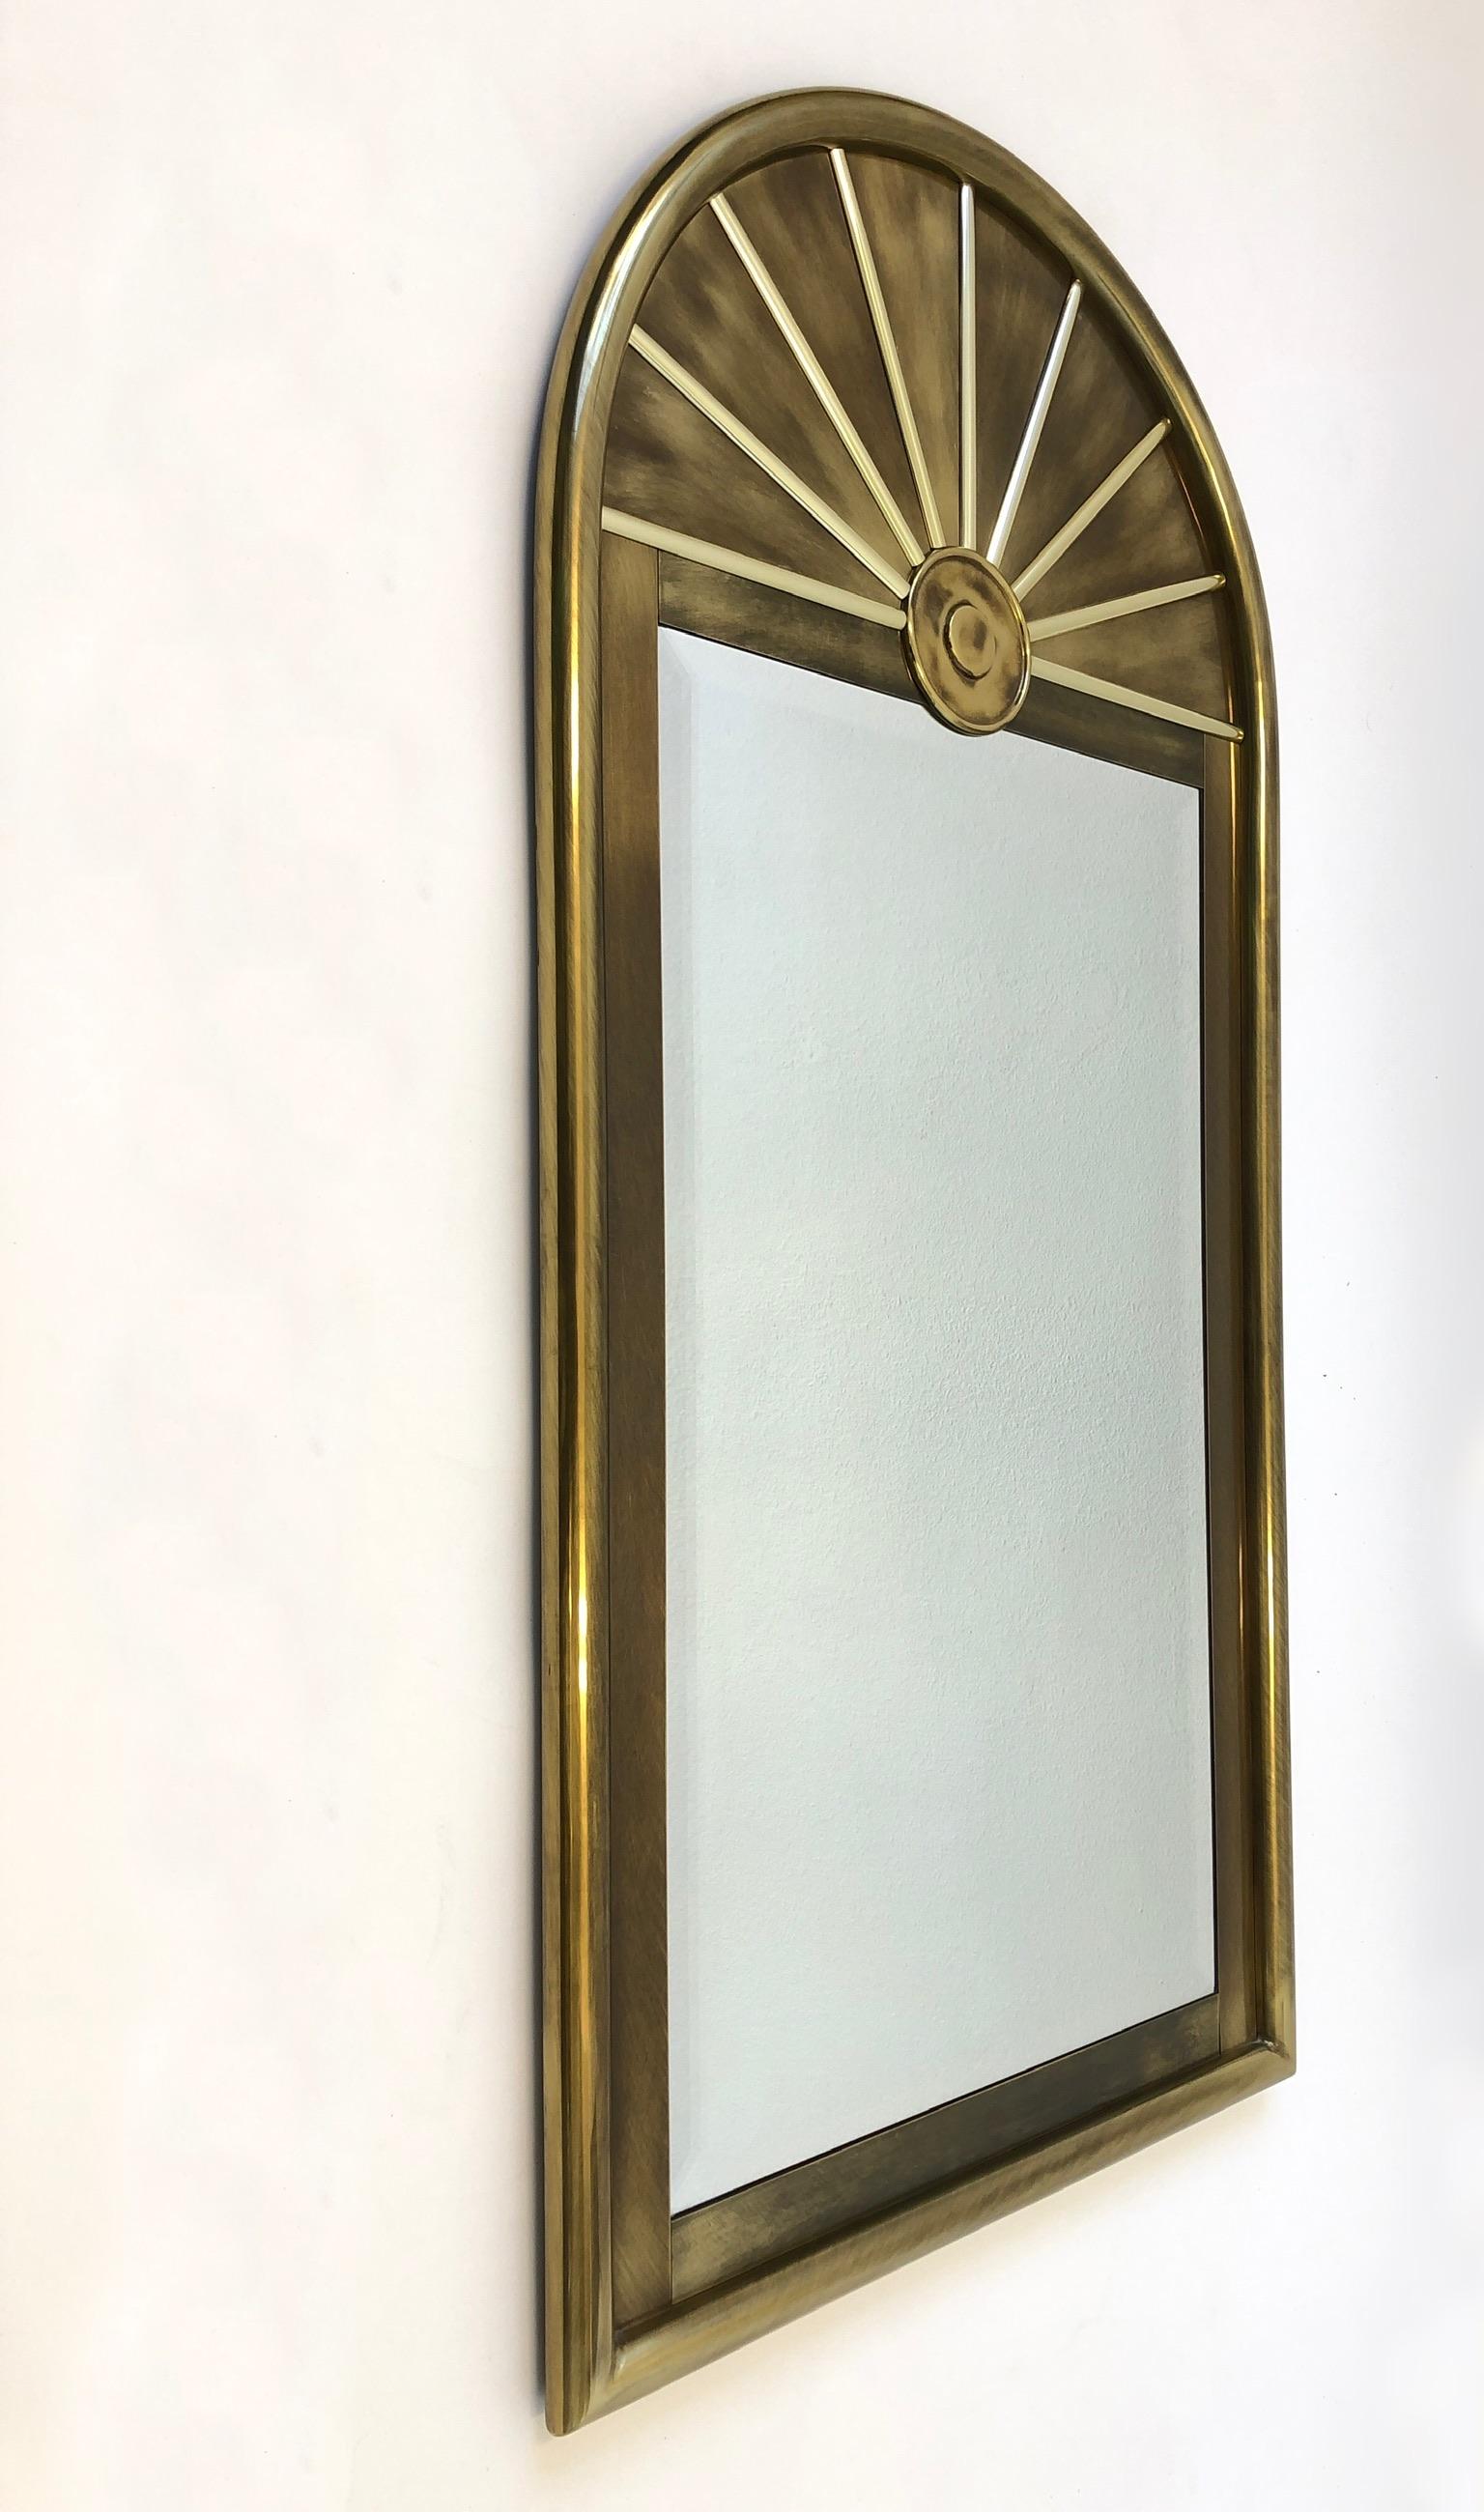 Beautiful 1970s aged brass beveled mirror by Mastercraft.
The mirror is in original condition, so it shows minor wear consistent with age.
Measurements: 56” high, 28” wide and 1.75” deep.